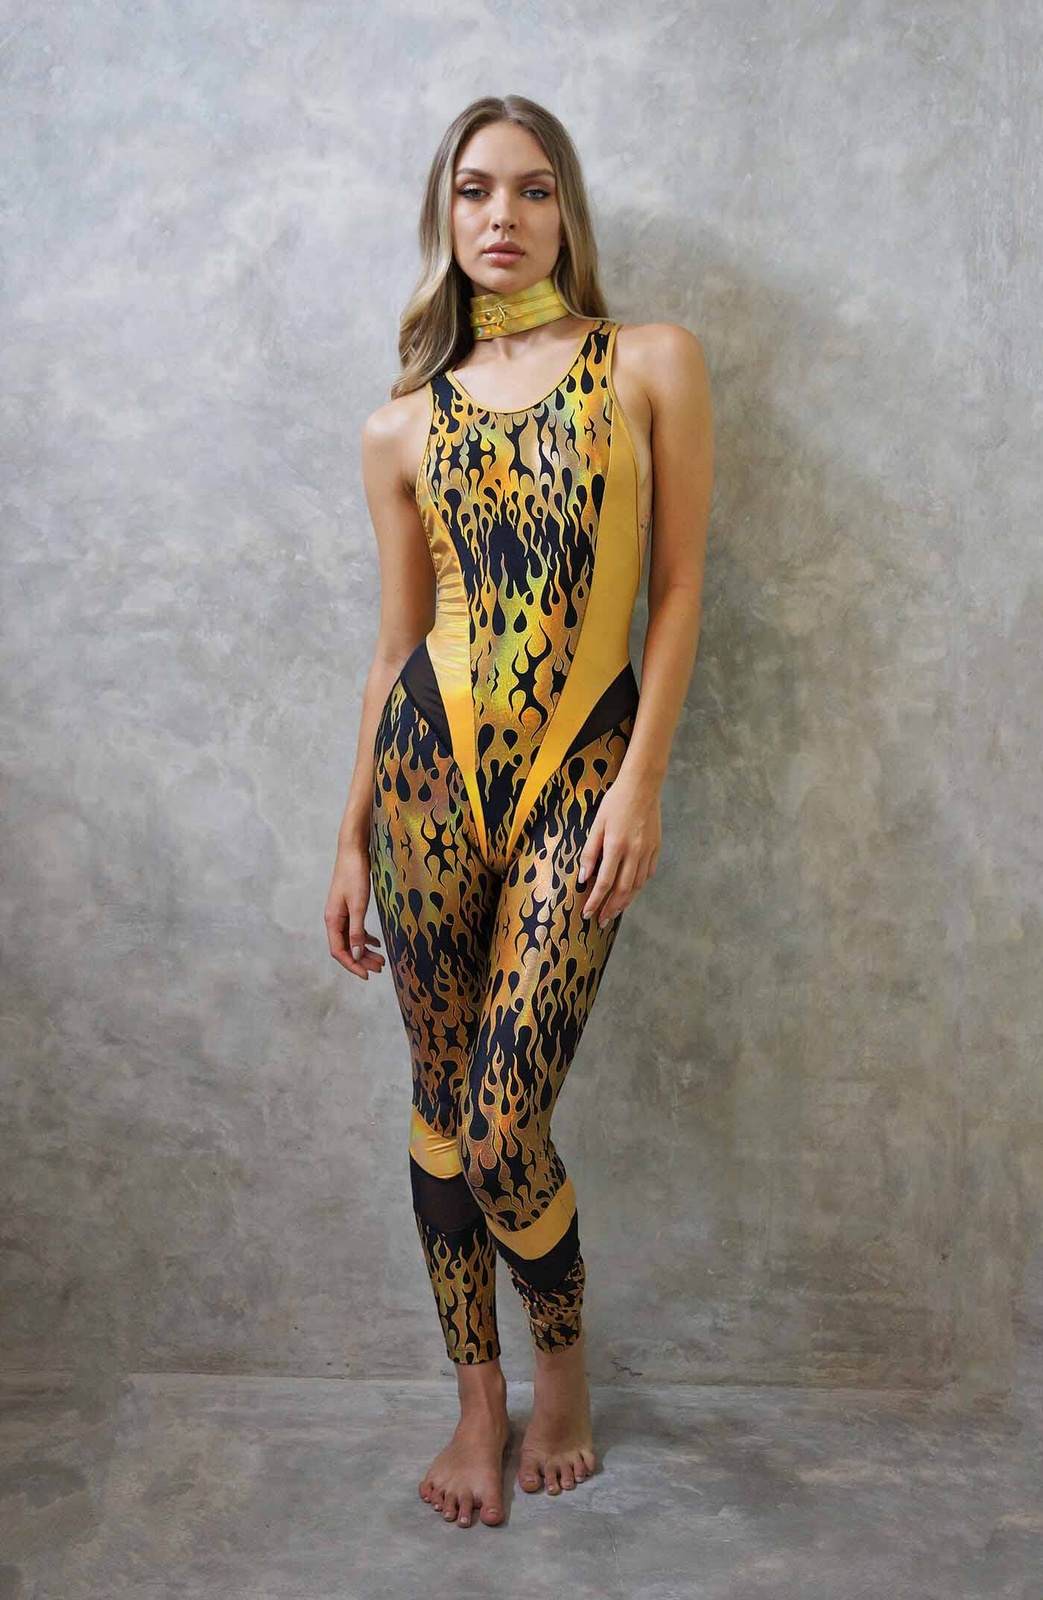 Flame Rave Outfit, High Voltage Catsuit